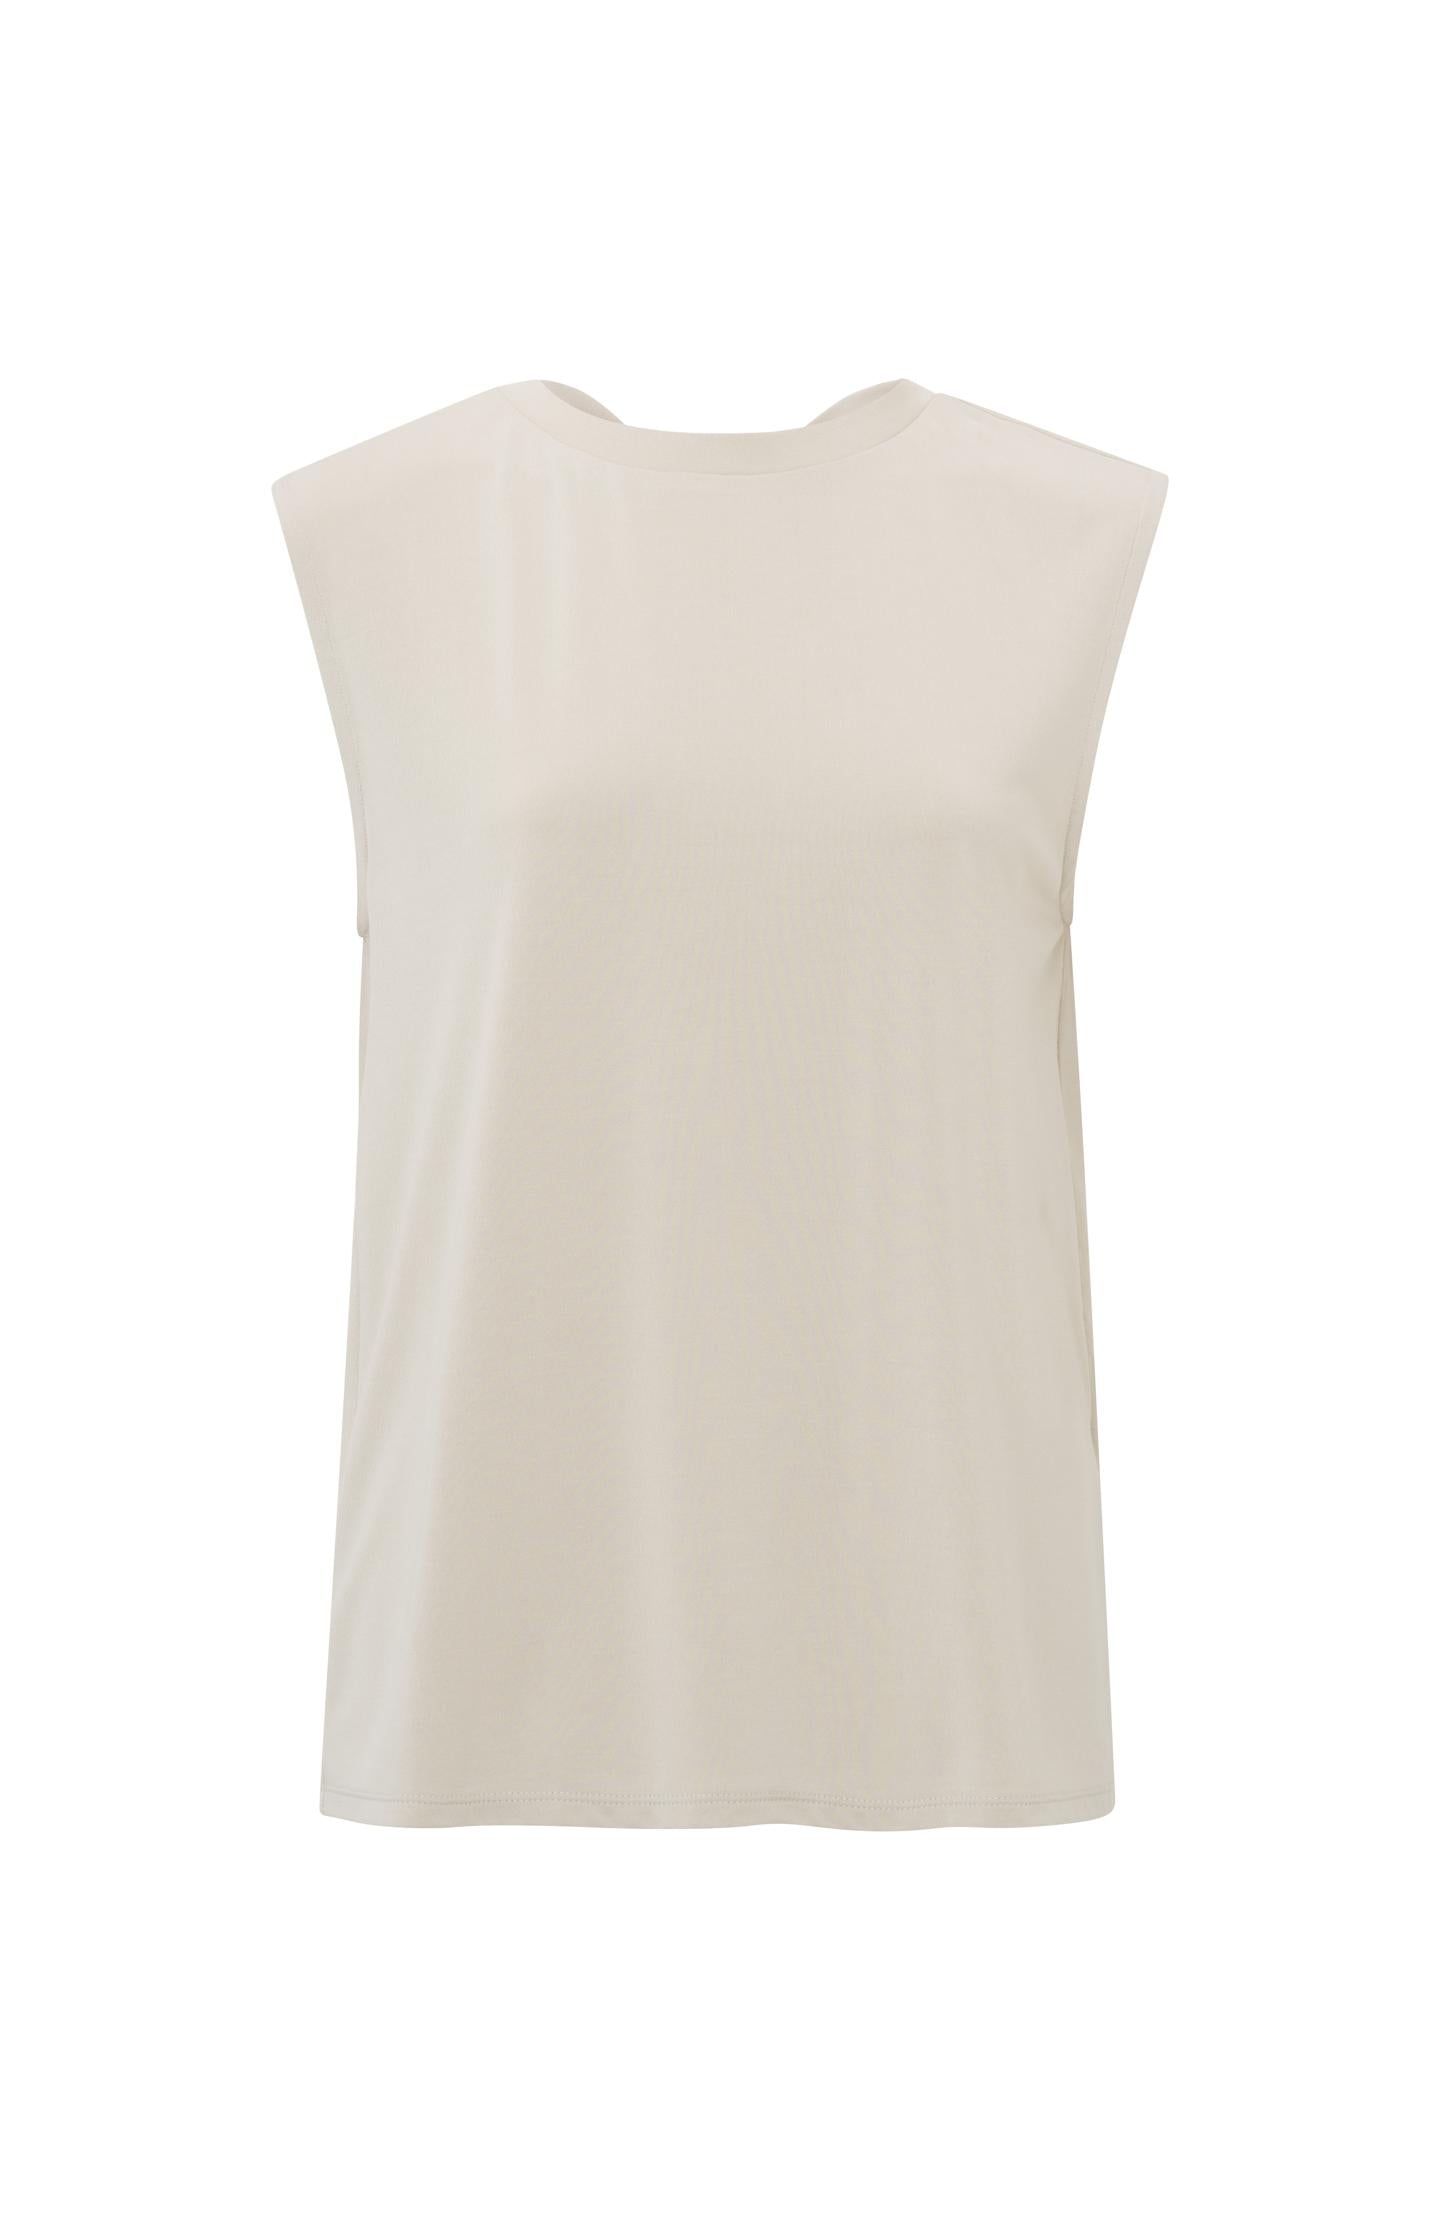 Sleeveless top with crewneck and back detail in regular fit - Type: product